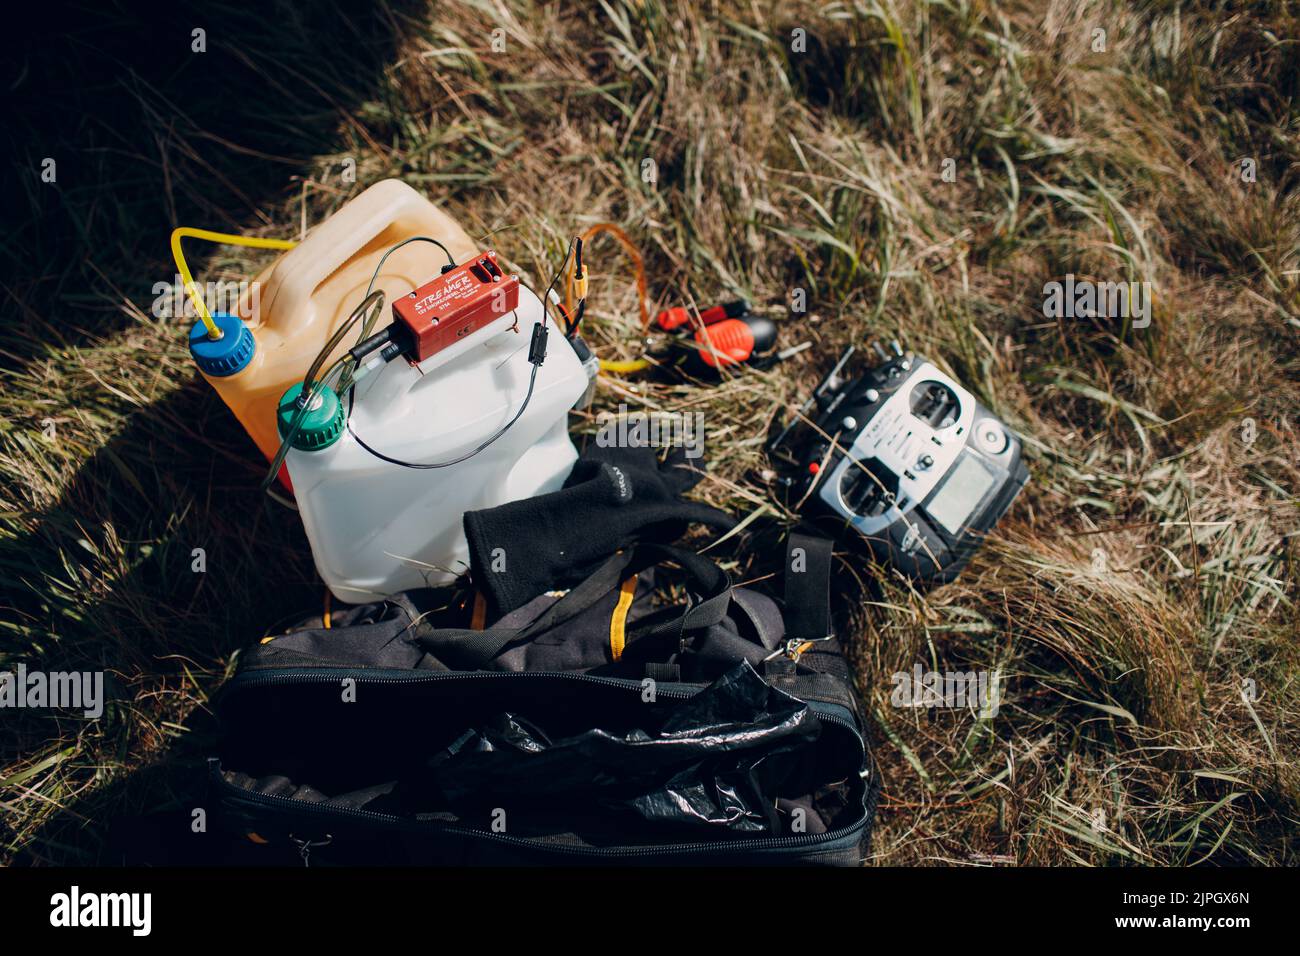 Fuel gas and parts stuff for Radio control rc airplane toy model on ground. Stock Photo